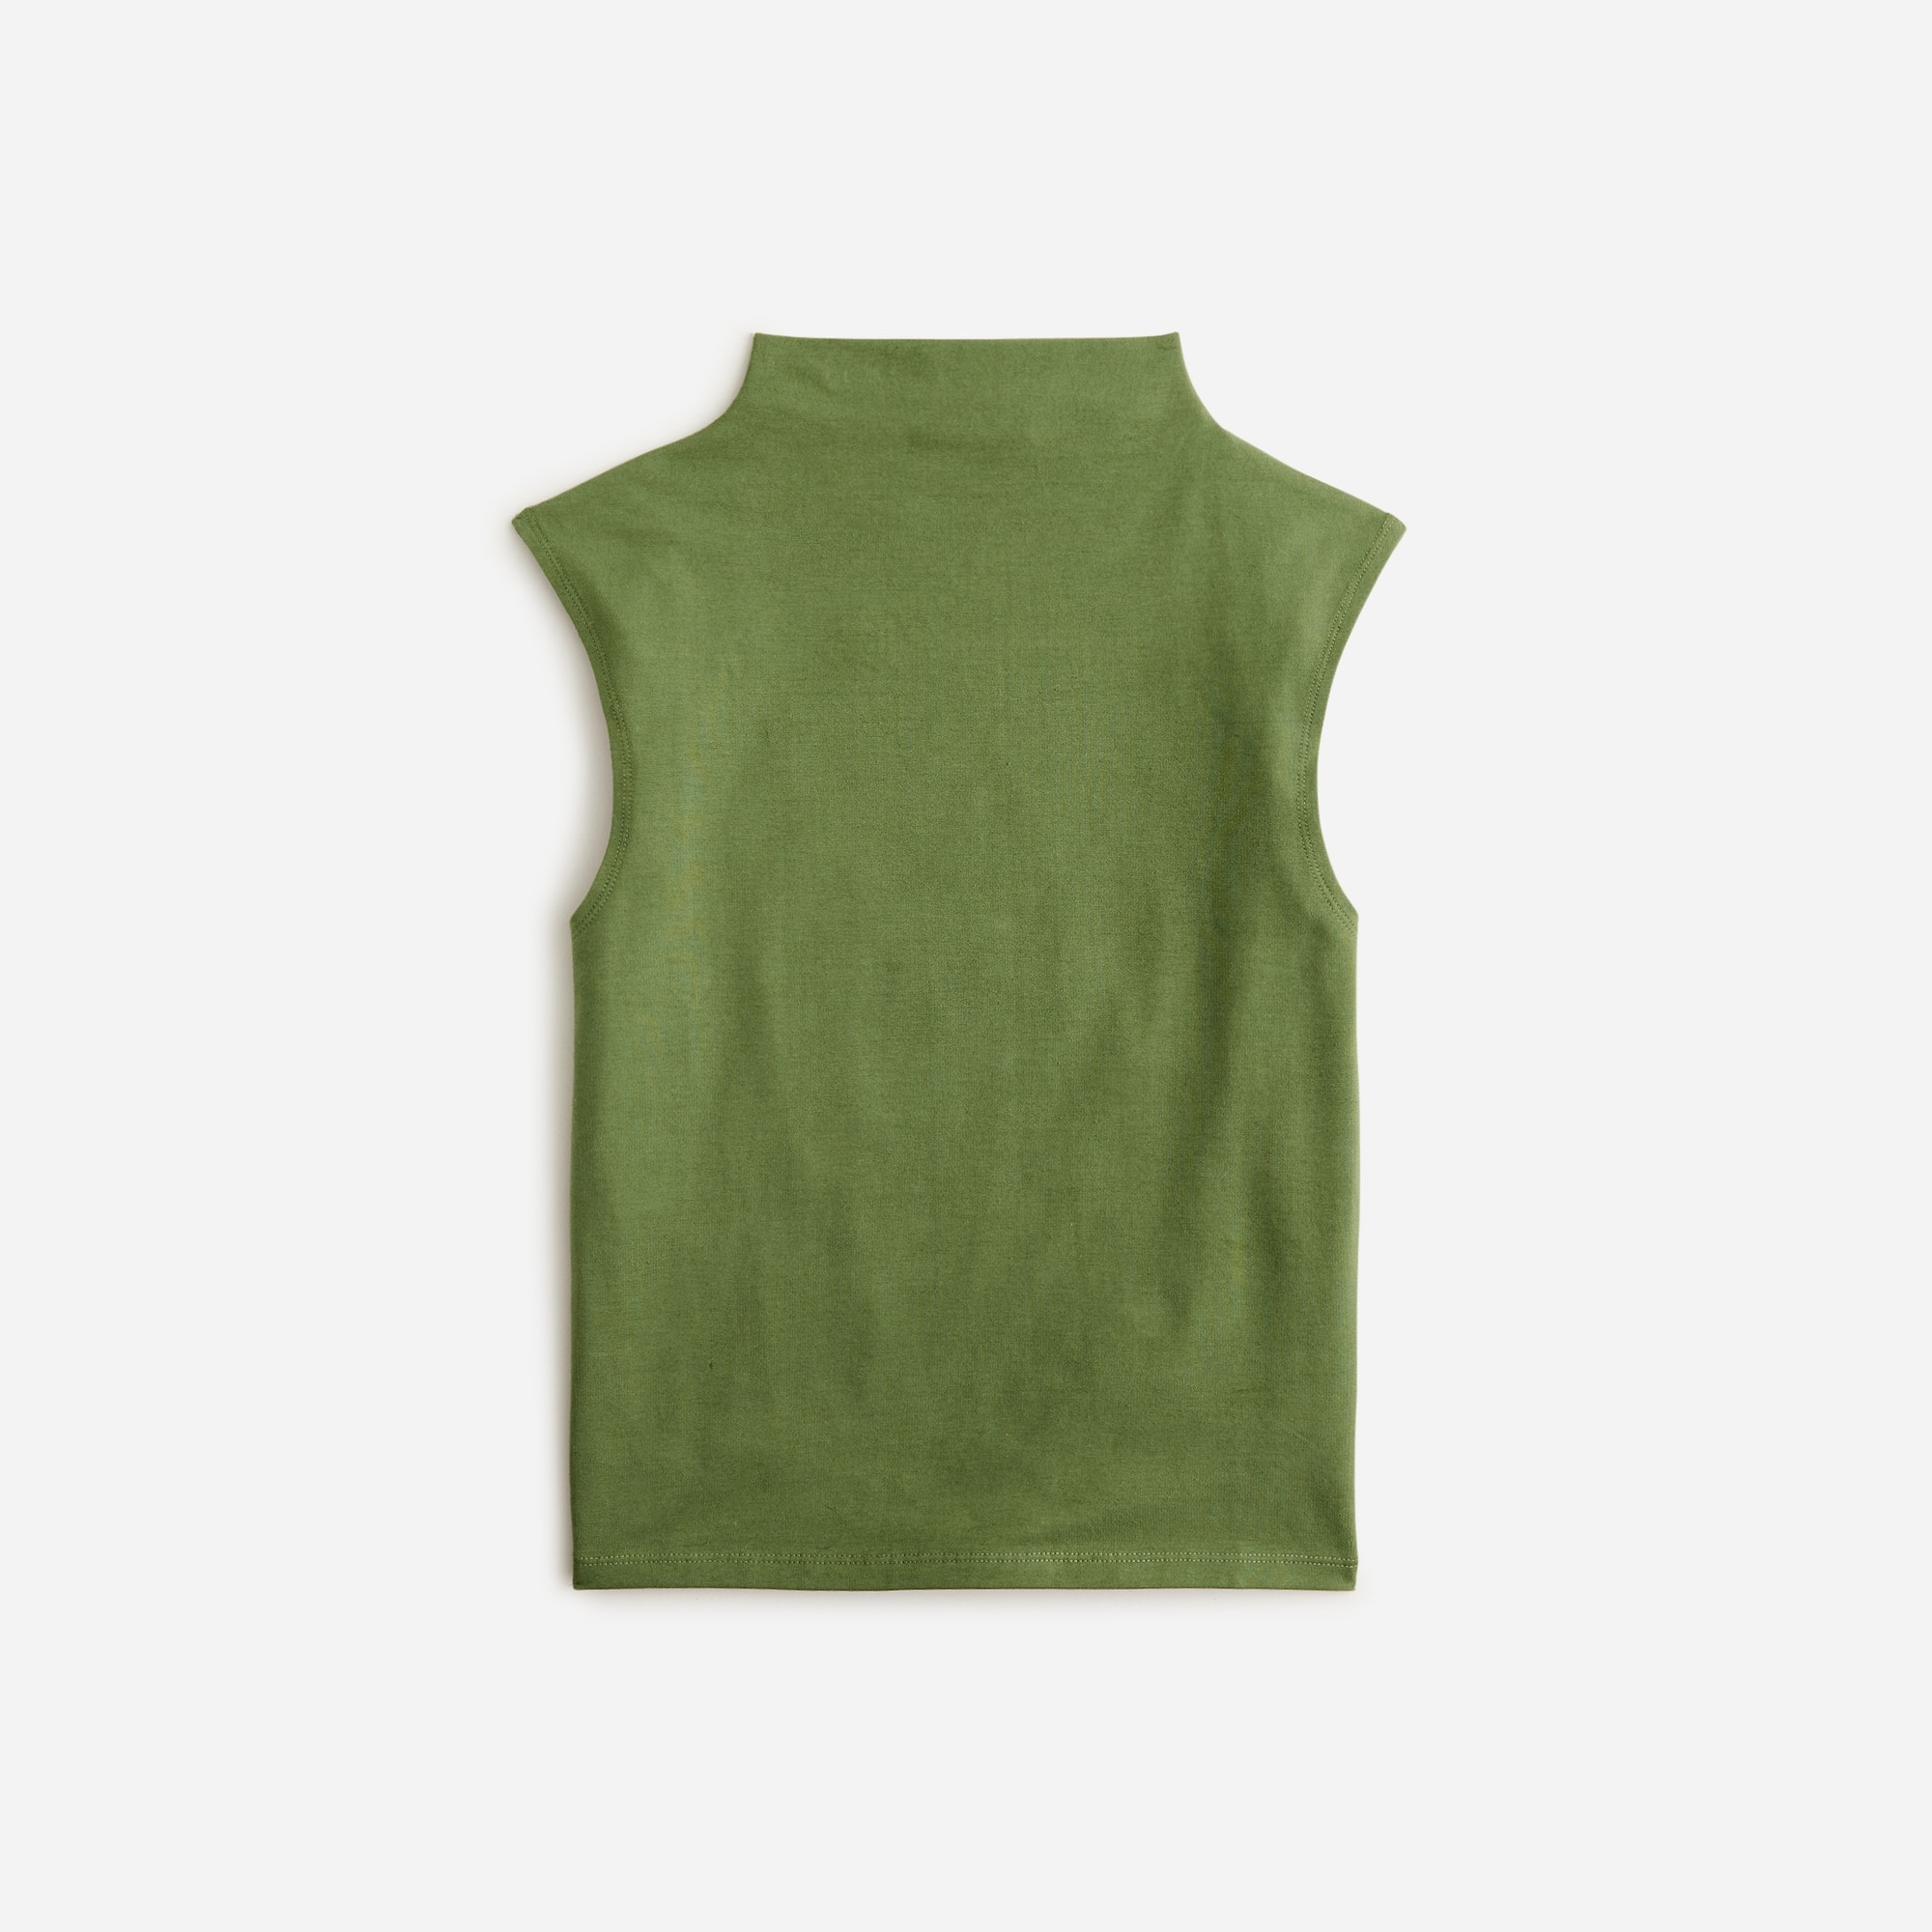 womens Fitted mockneck tank top in stretch cotton blend